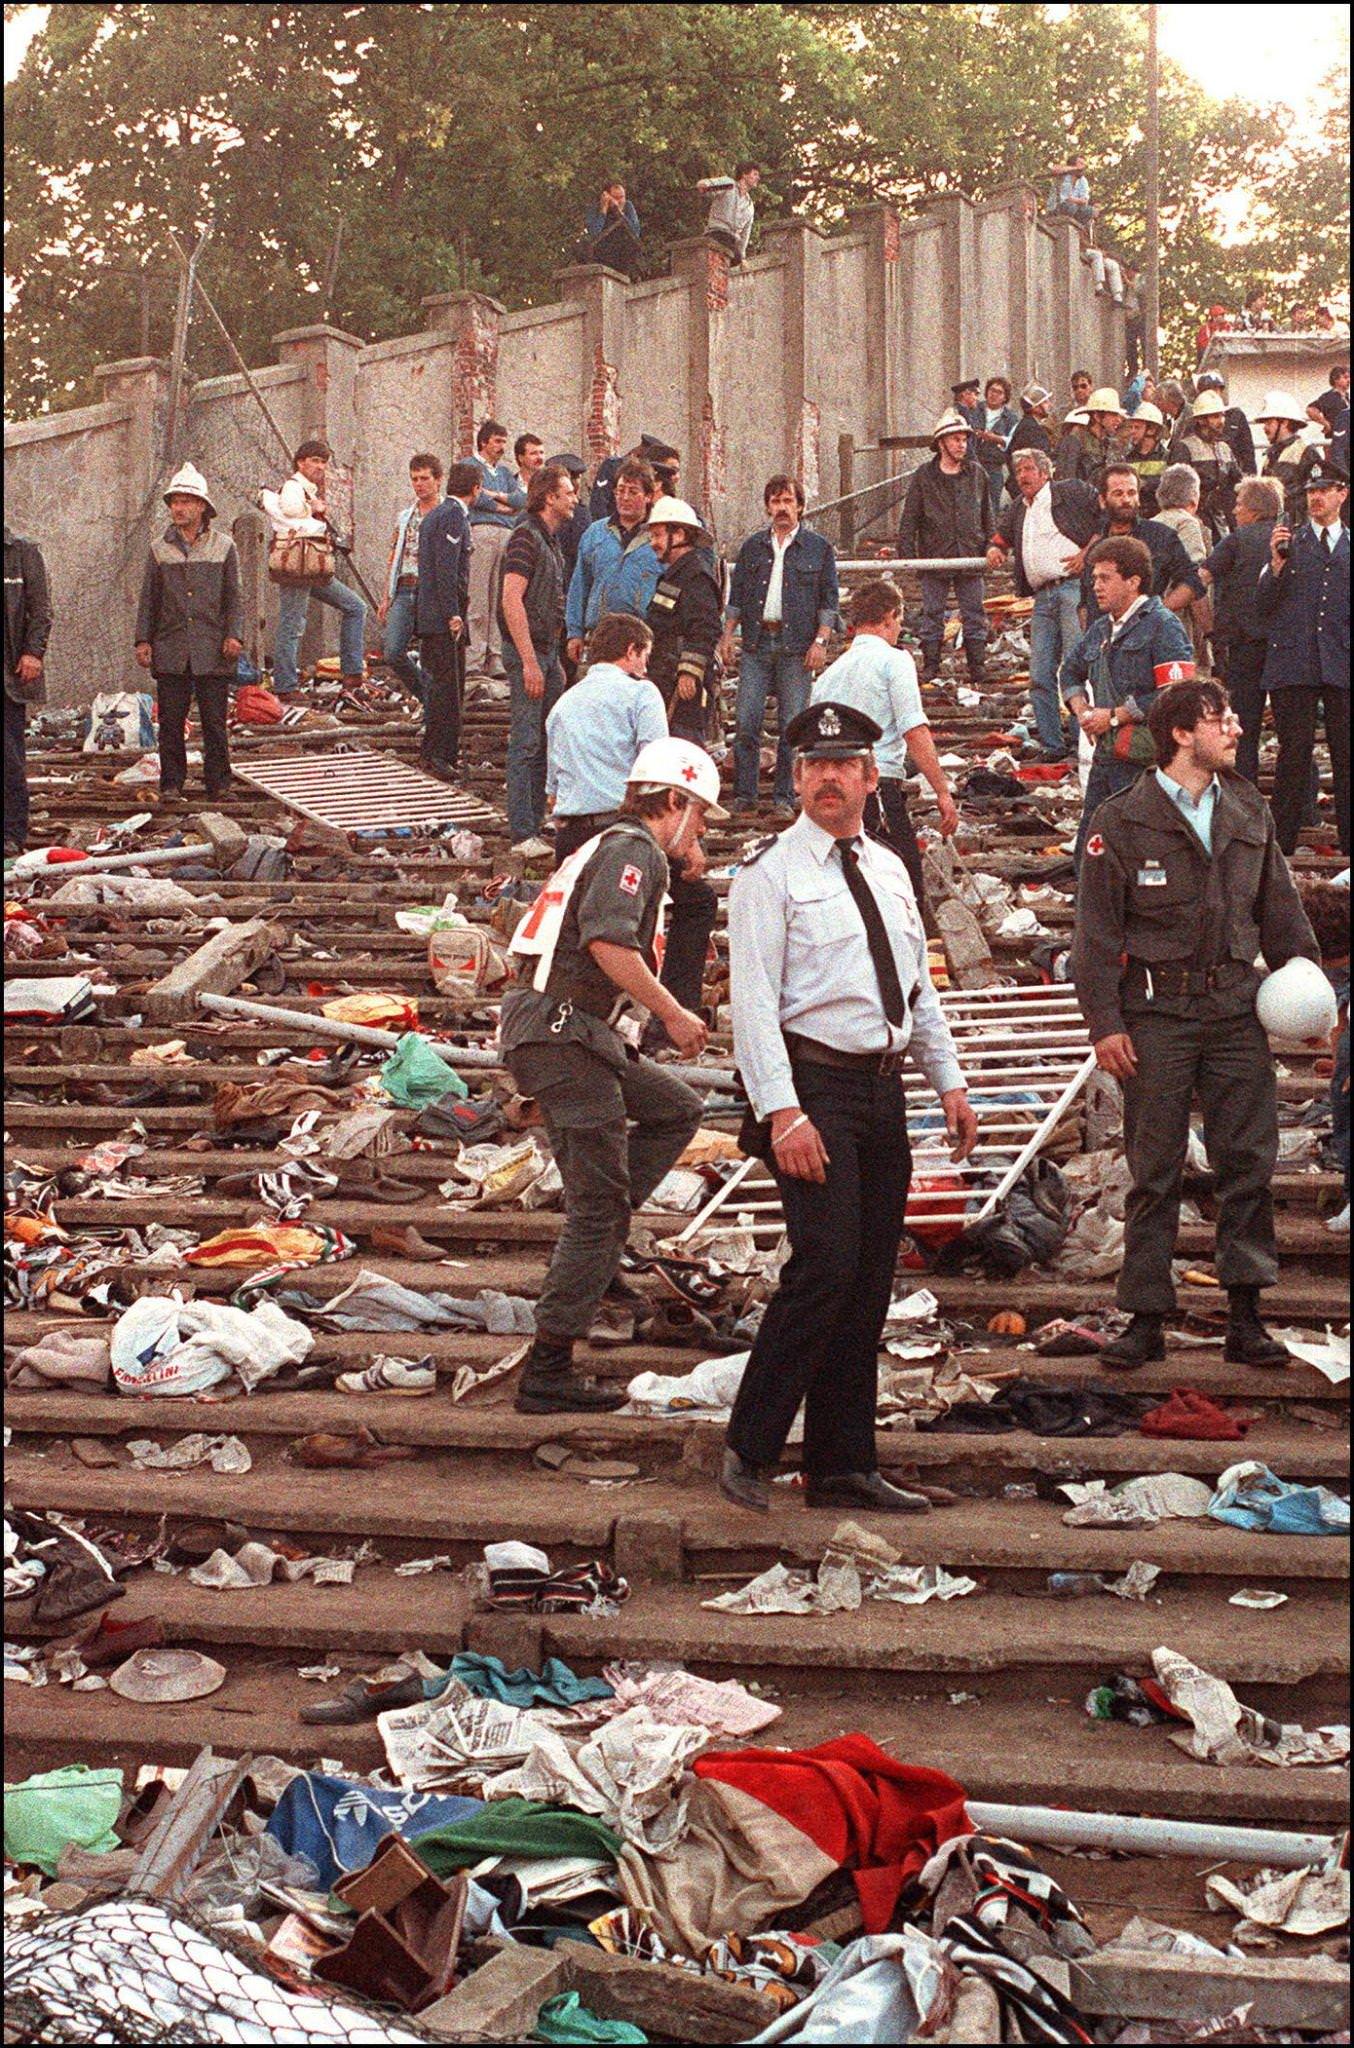 Heysel Stadium Disaster: Search for Victims After Riots, 1985